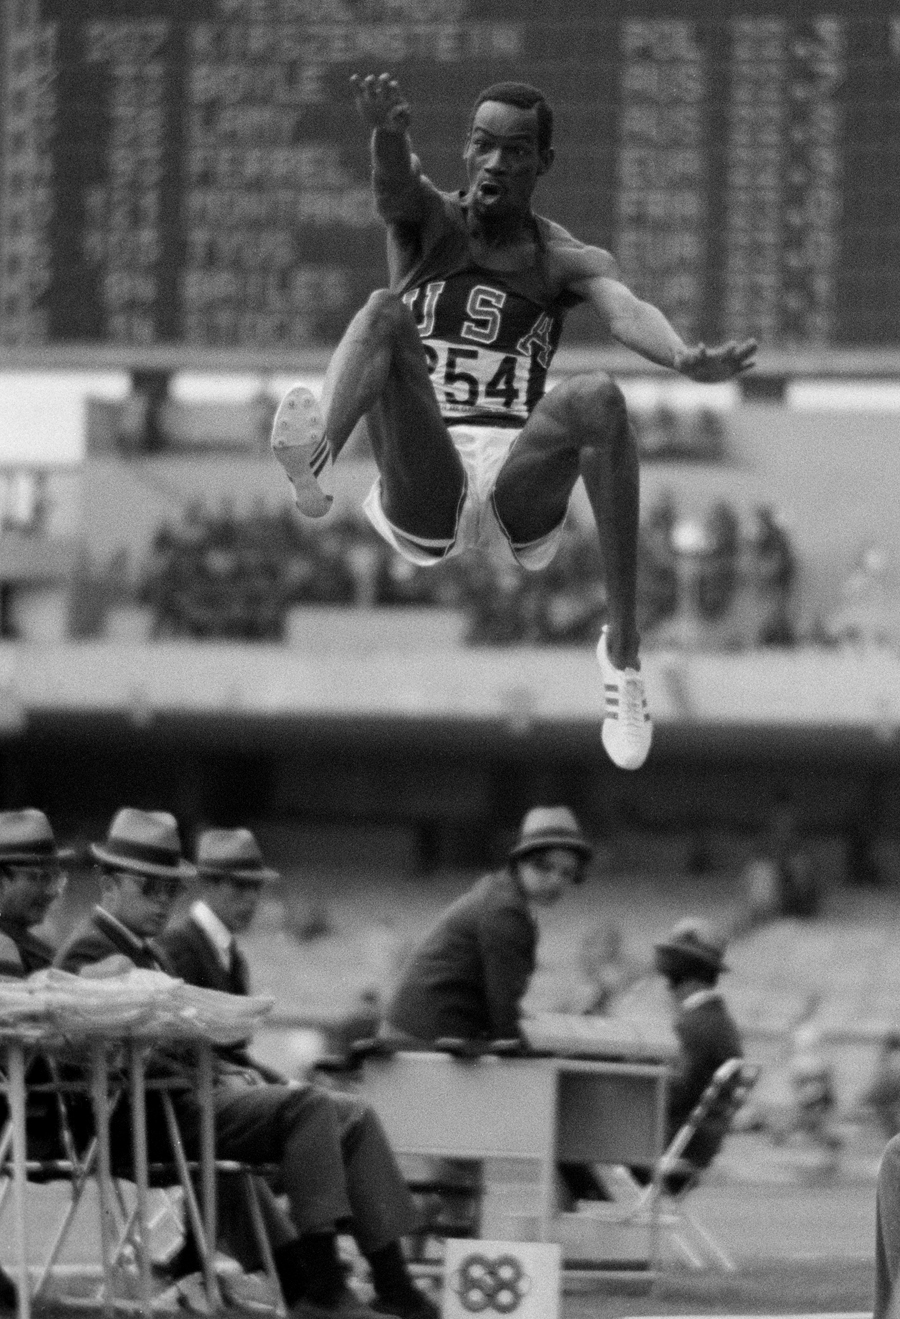 Bob Beamon stunned the world by soaring out to 8.90m to win gold in the long jump